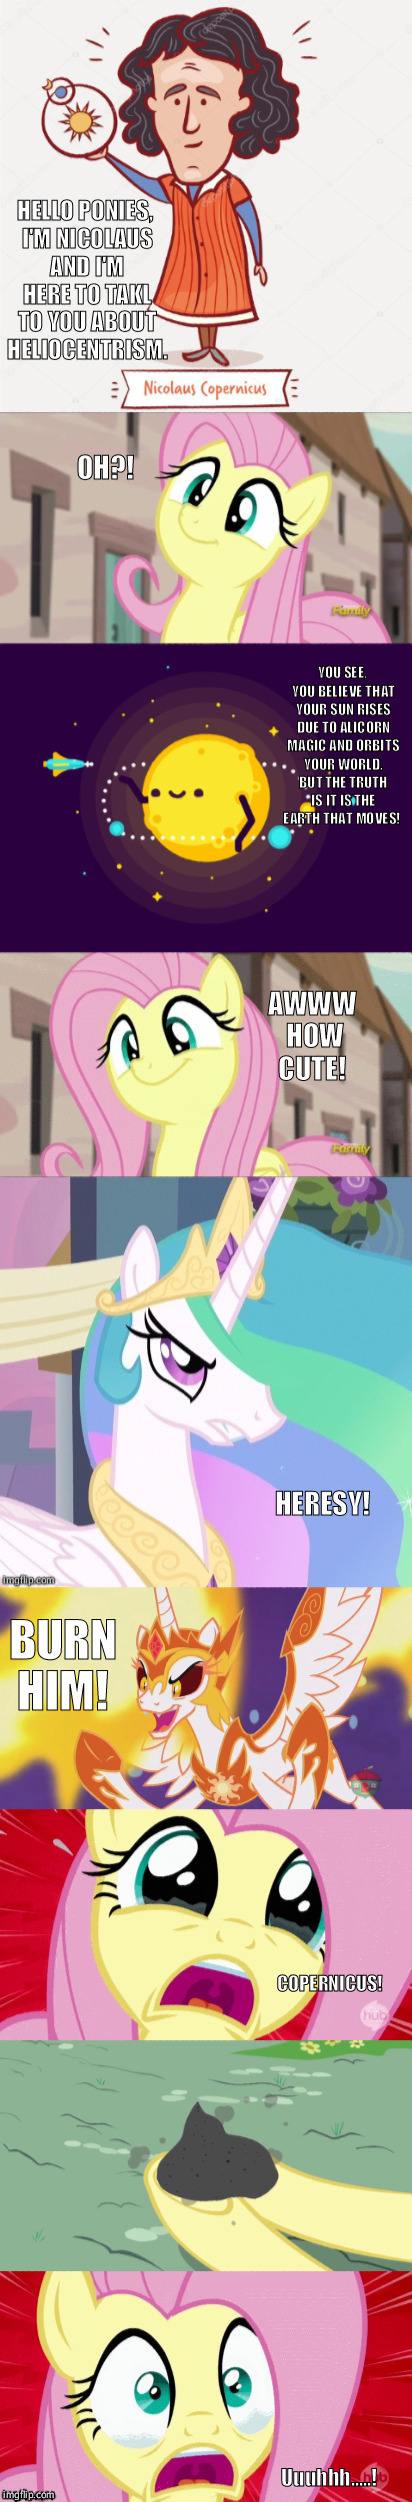 MLP Copernicus  | COPERNICUS! Uuuhhh.....! | image tagged in mlp,fluttershy,funny,celestia,heresy | made w/ Imgflip meme maker